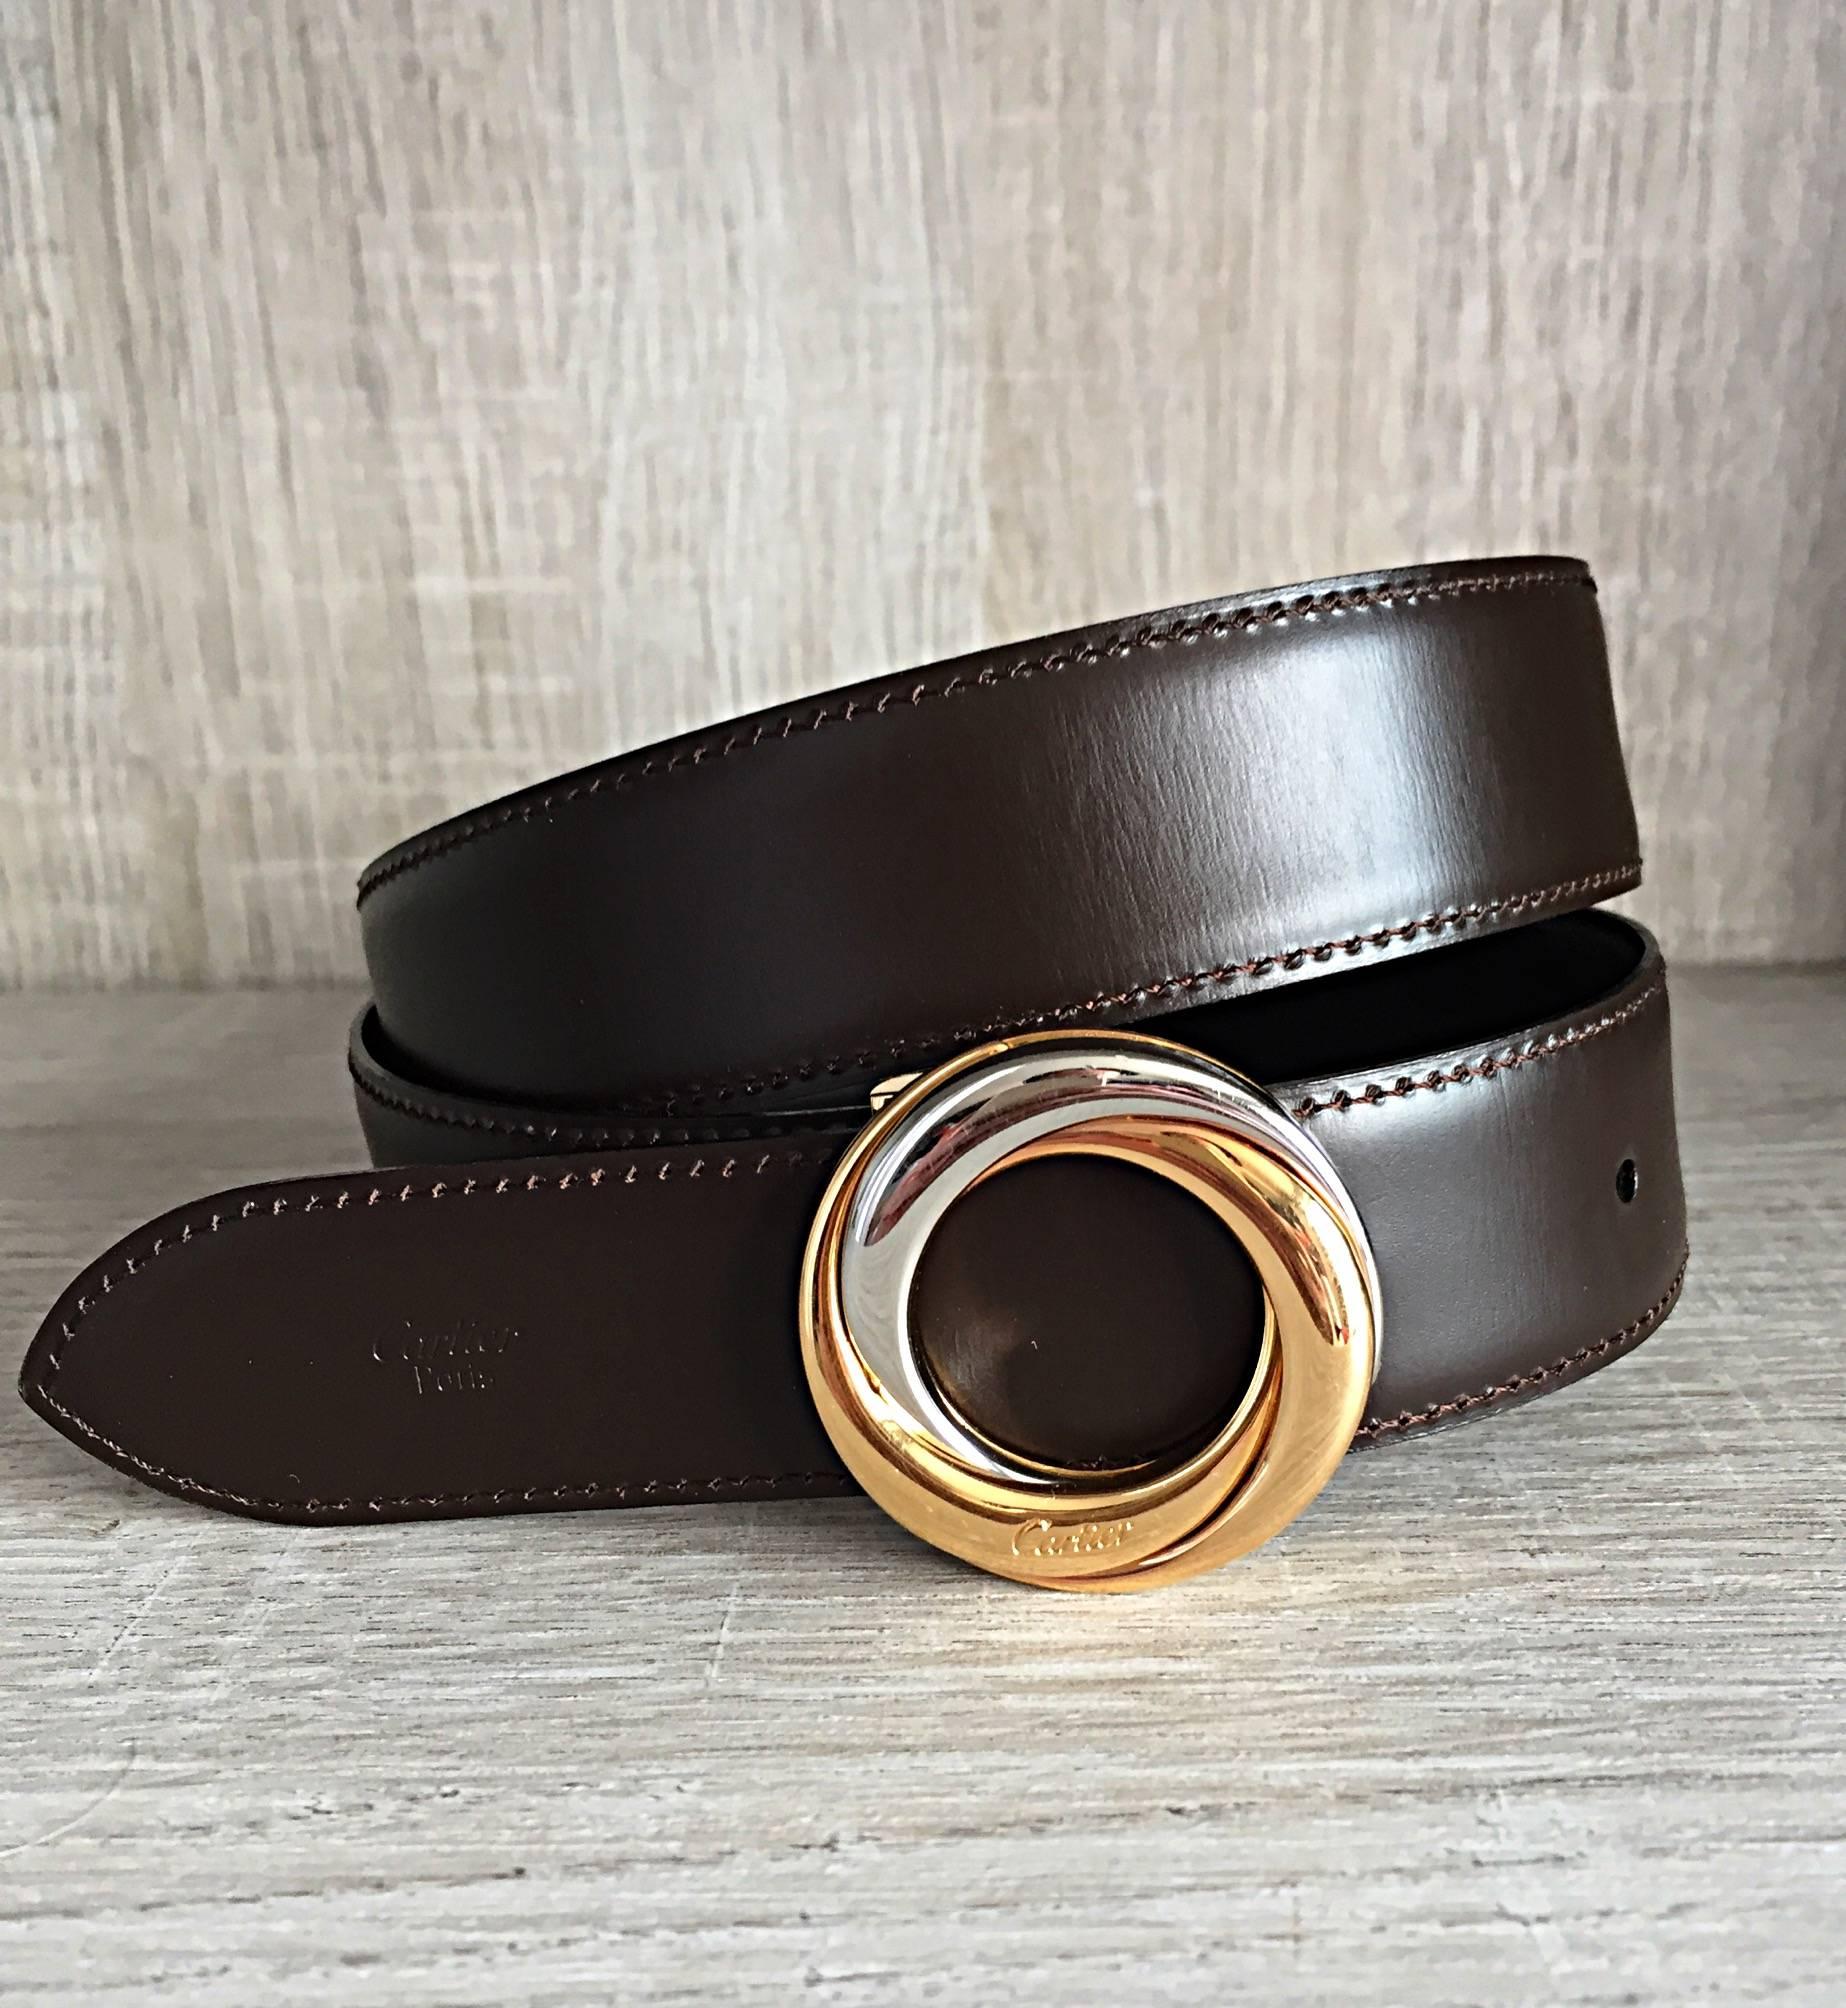 New Cartier Unisex Reversible Belt Brown + Black Two - Tone Gold & Silver Buckle 2